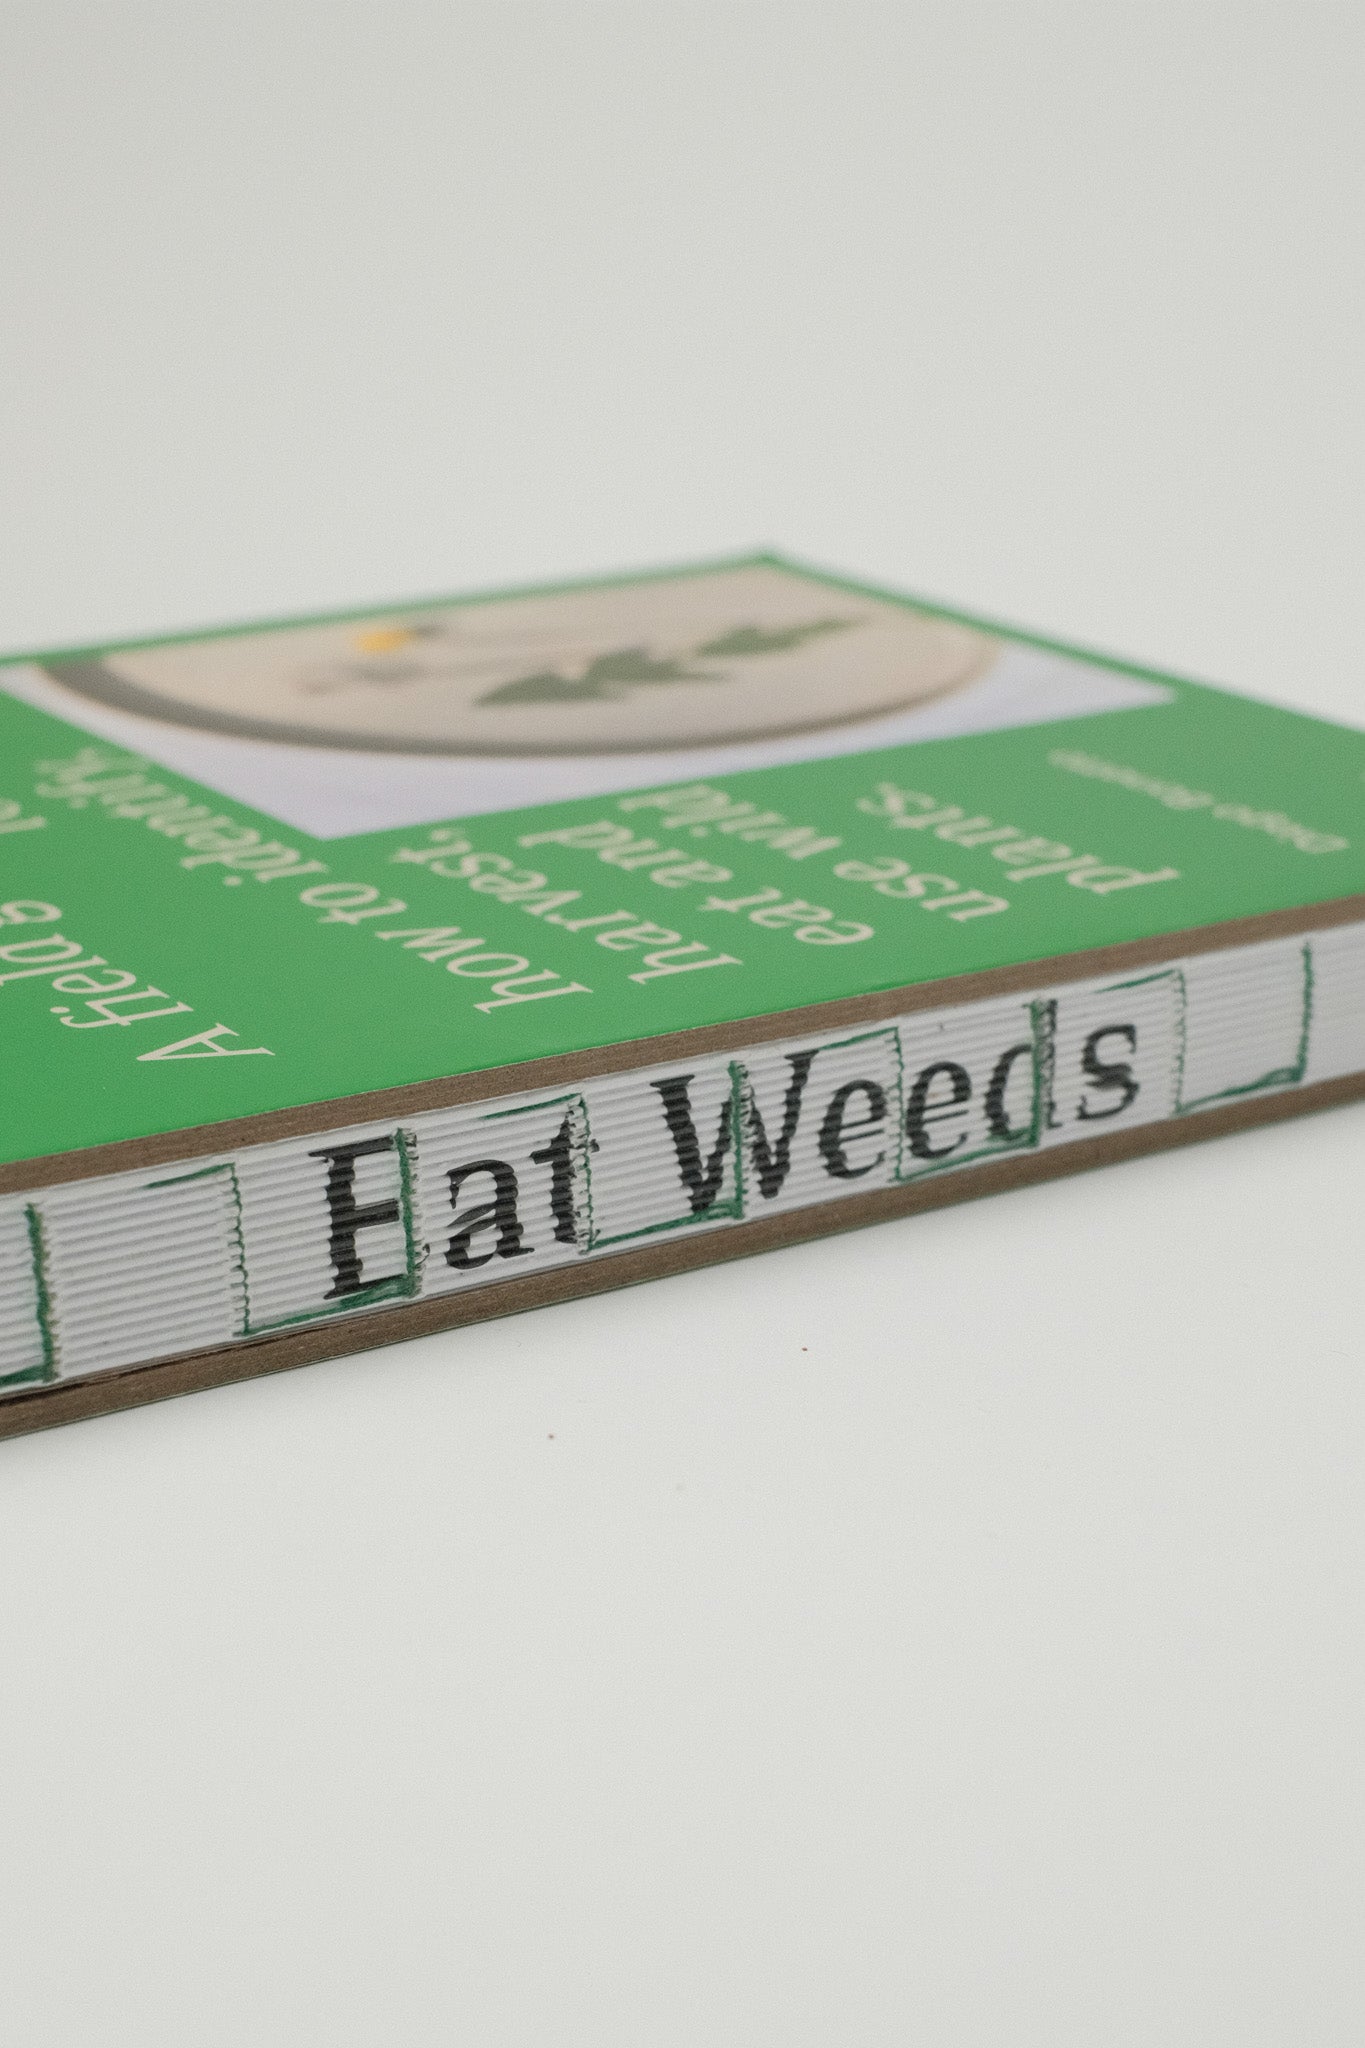 Eat Weeds by Diego Bonetto